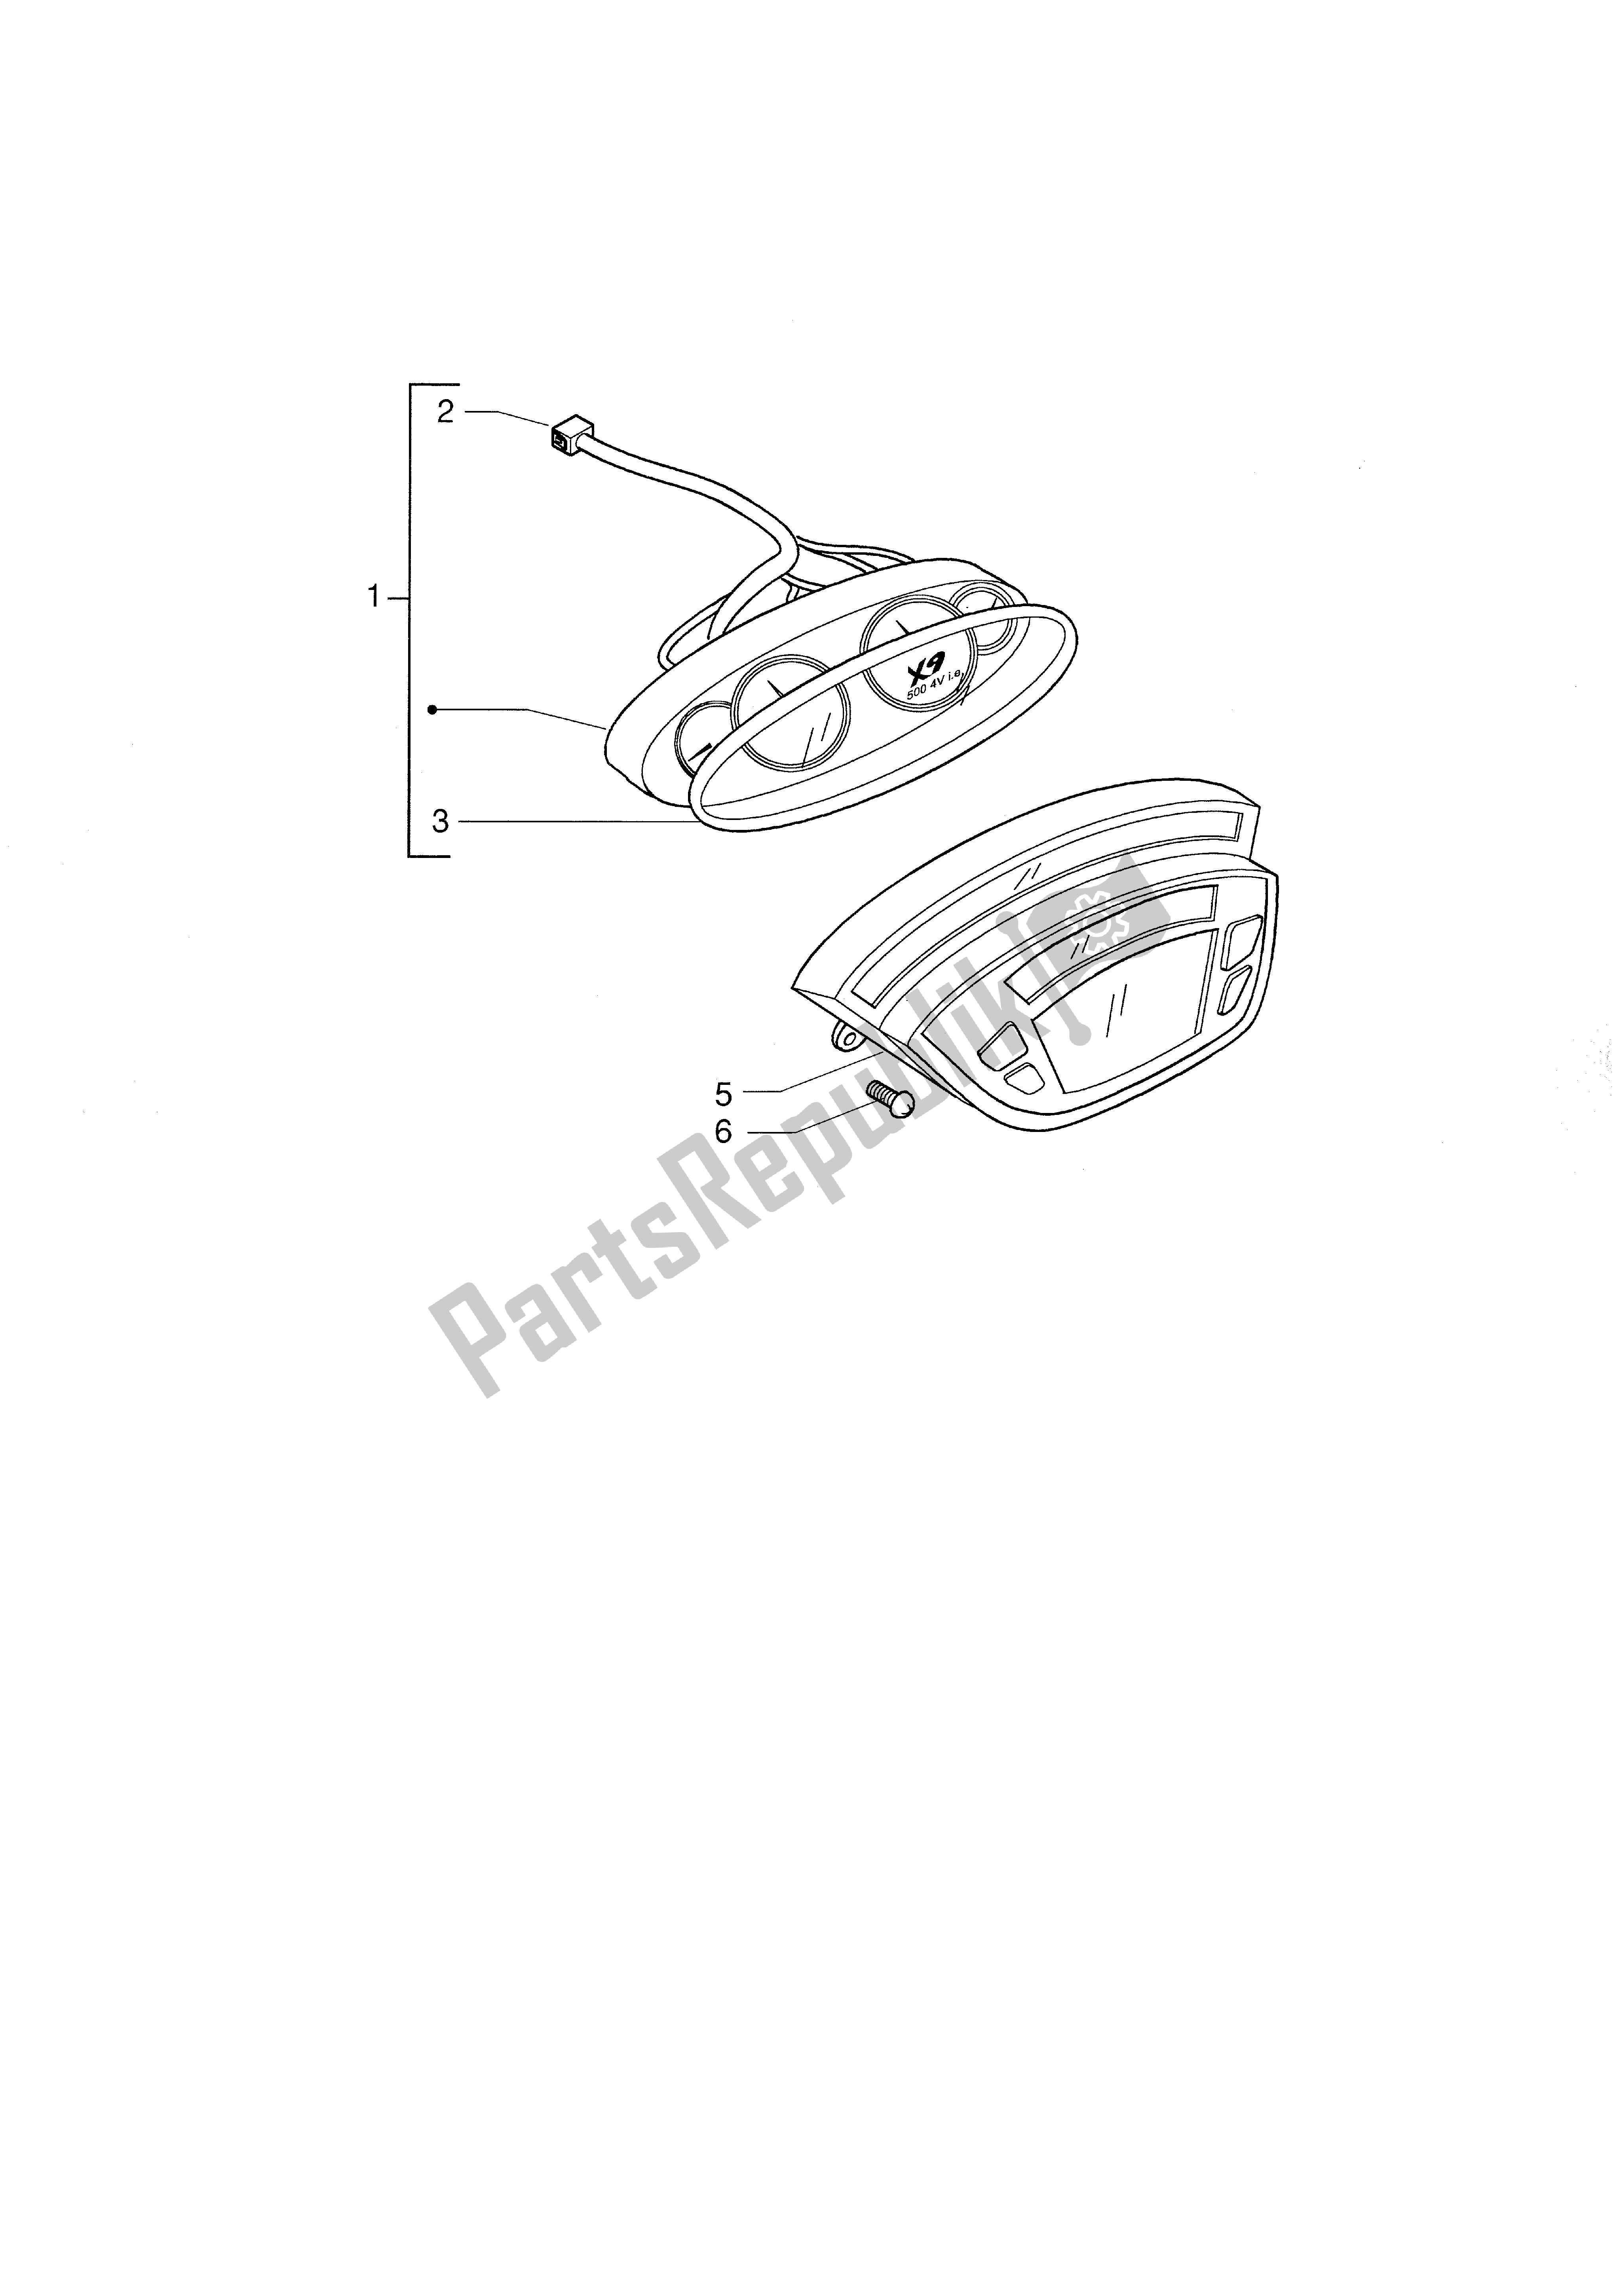 All parts for the Instrument Set of the Piaggio X9 500 2001 - 2002